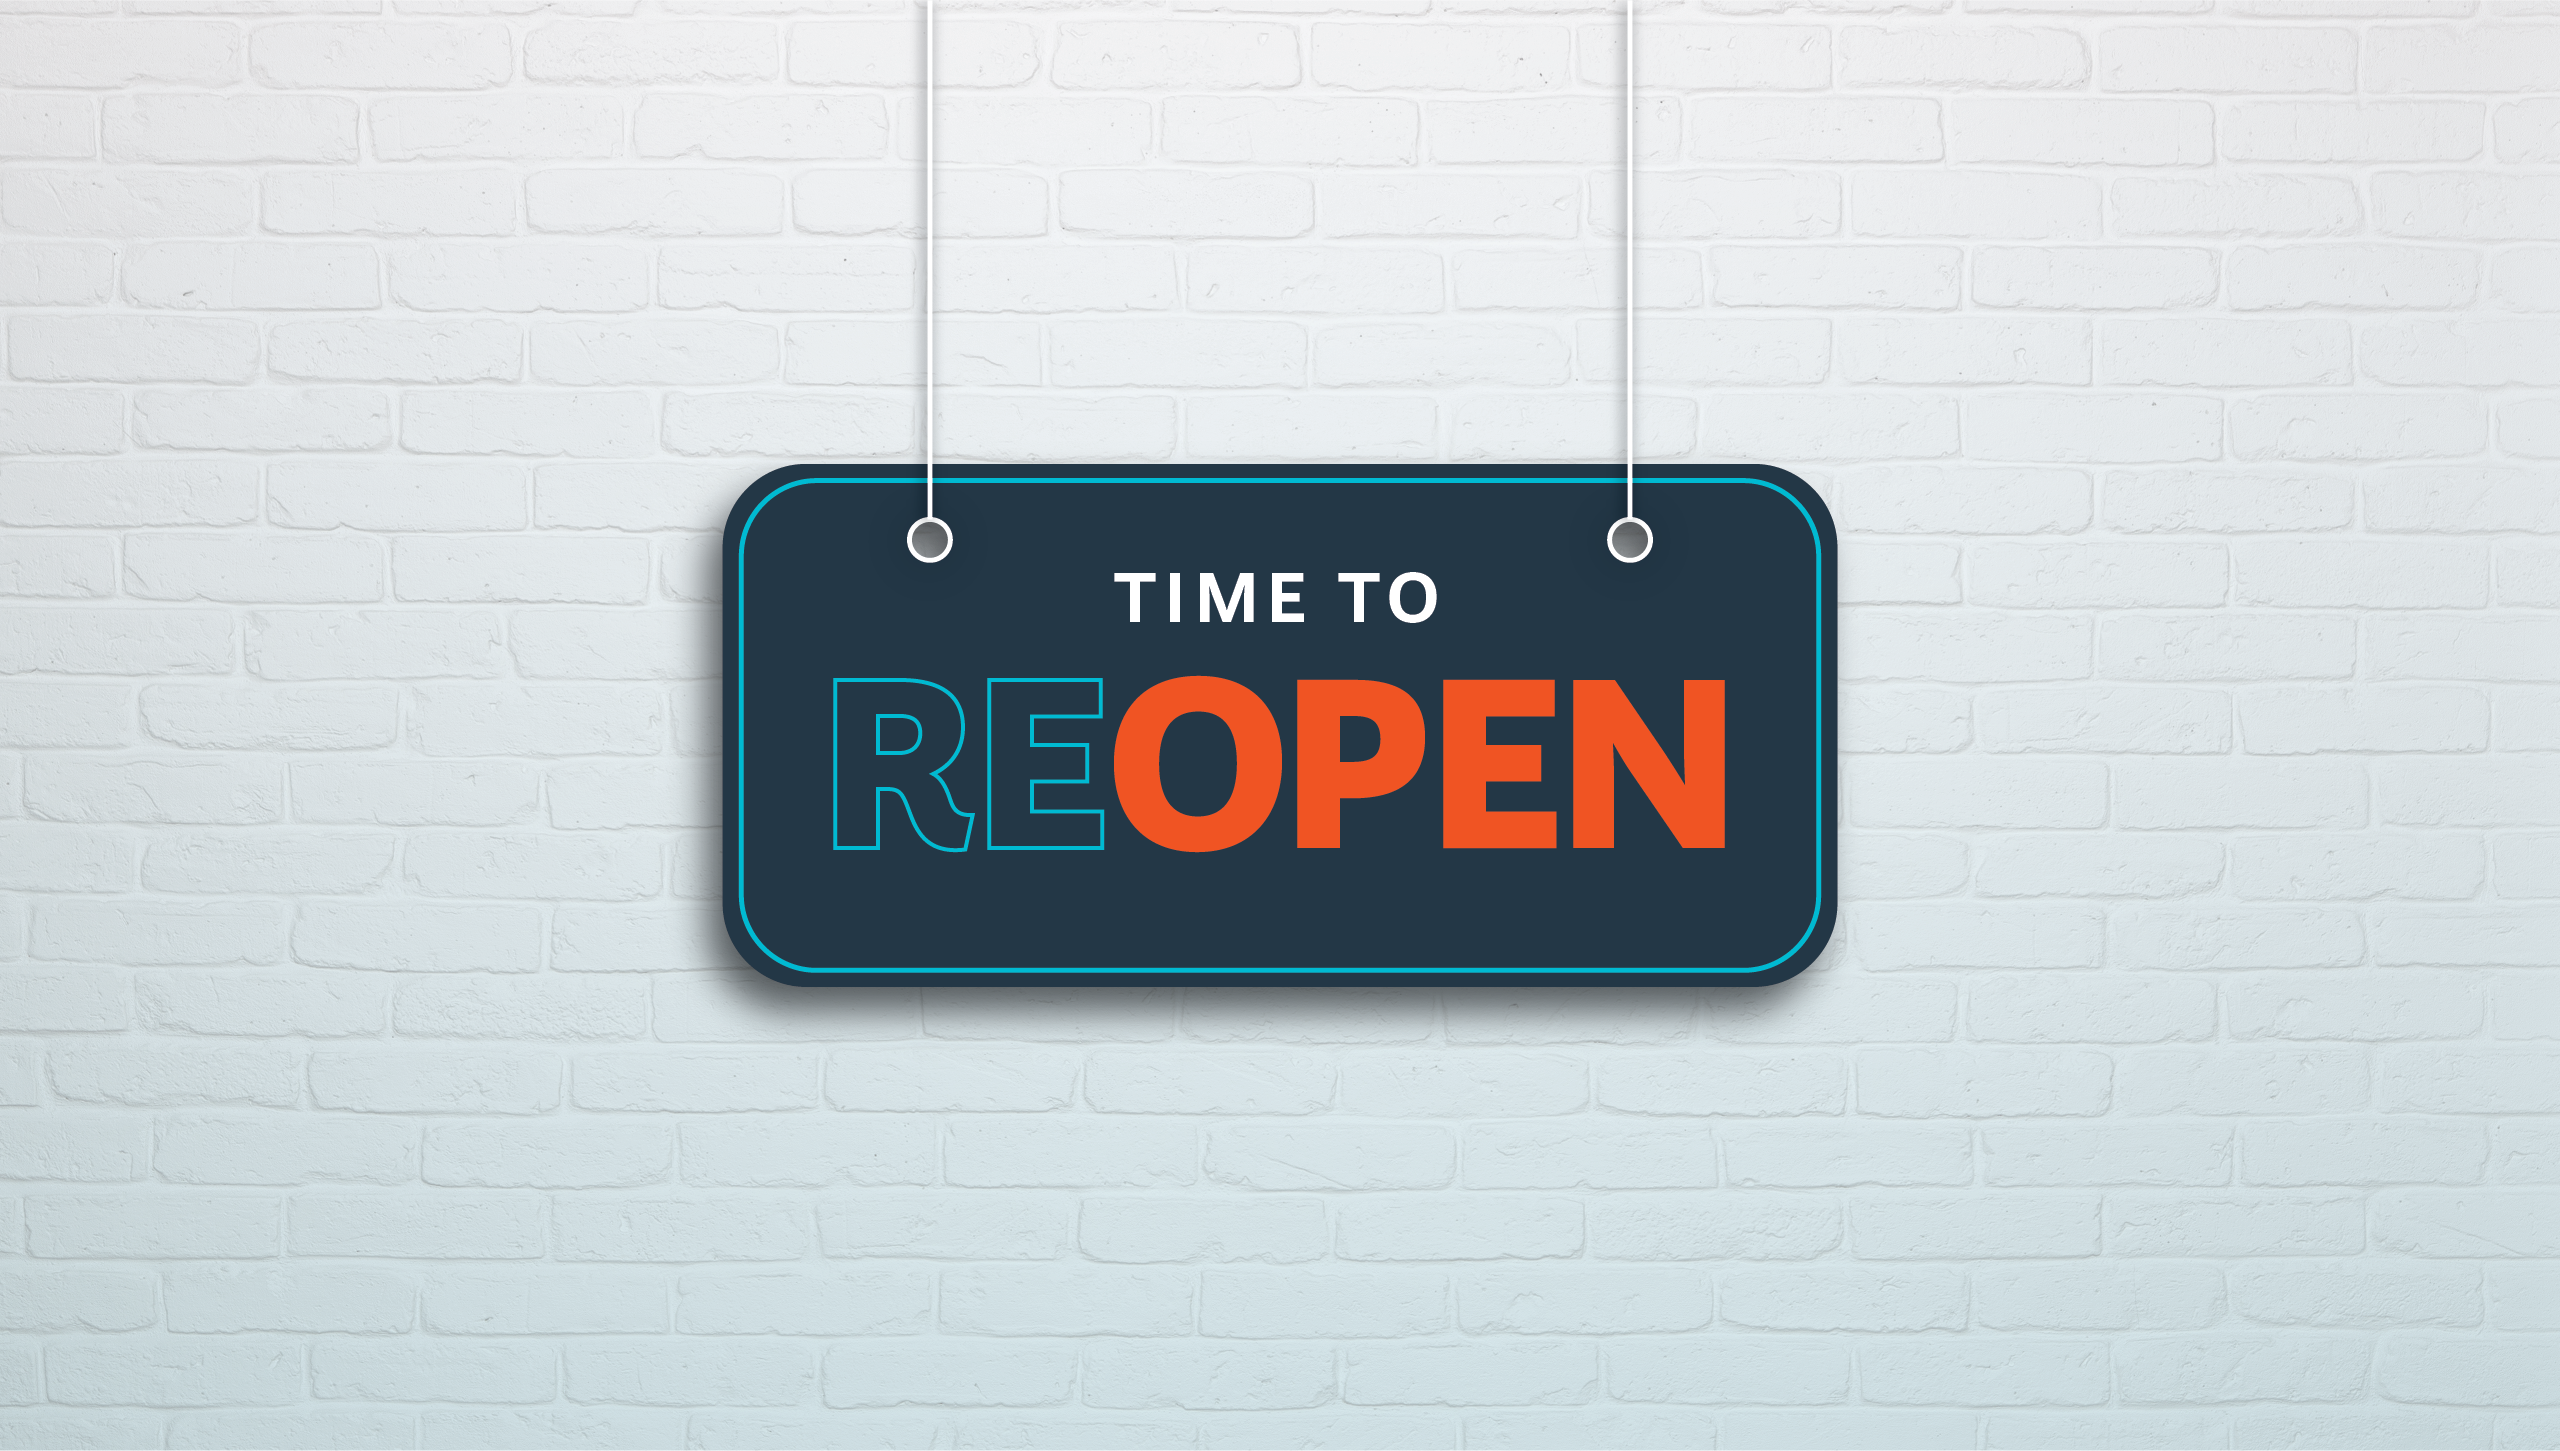 5-Point Brand Checklist to Help Your Business Reopen